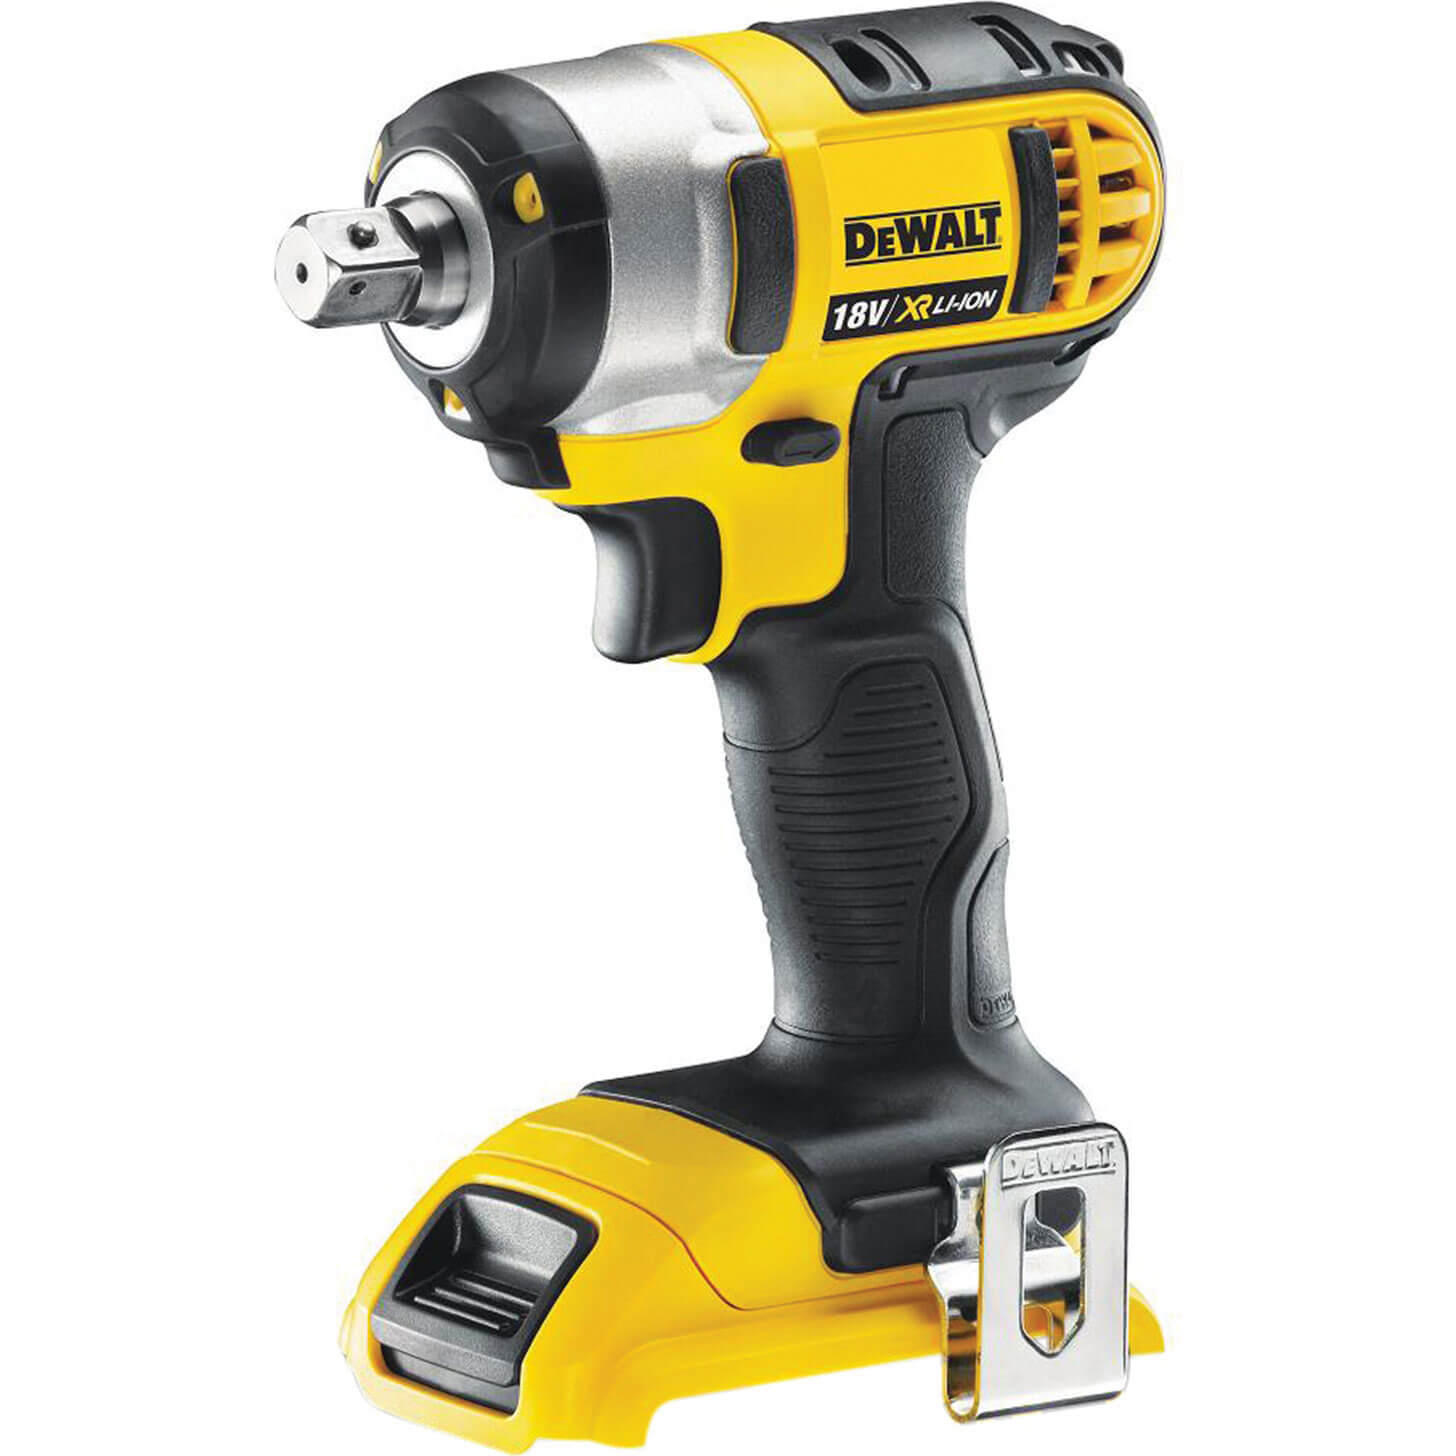 Image of DeWalt DCF880 18v XR Cordless 1/2" Drive Impact Wrench No Batteries No Charger No Case